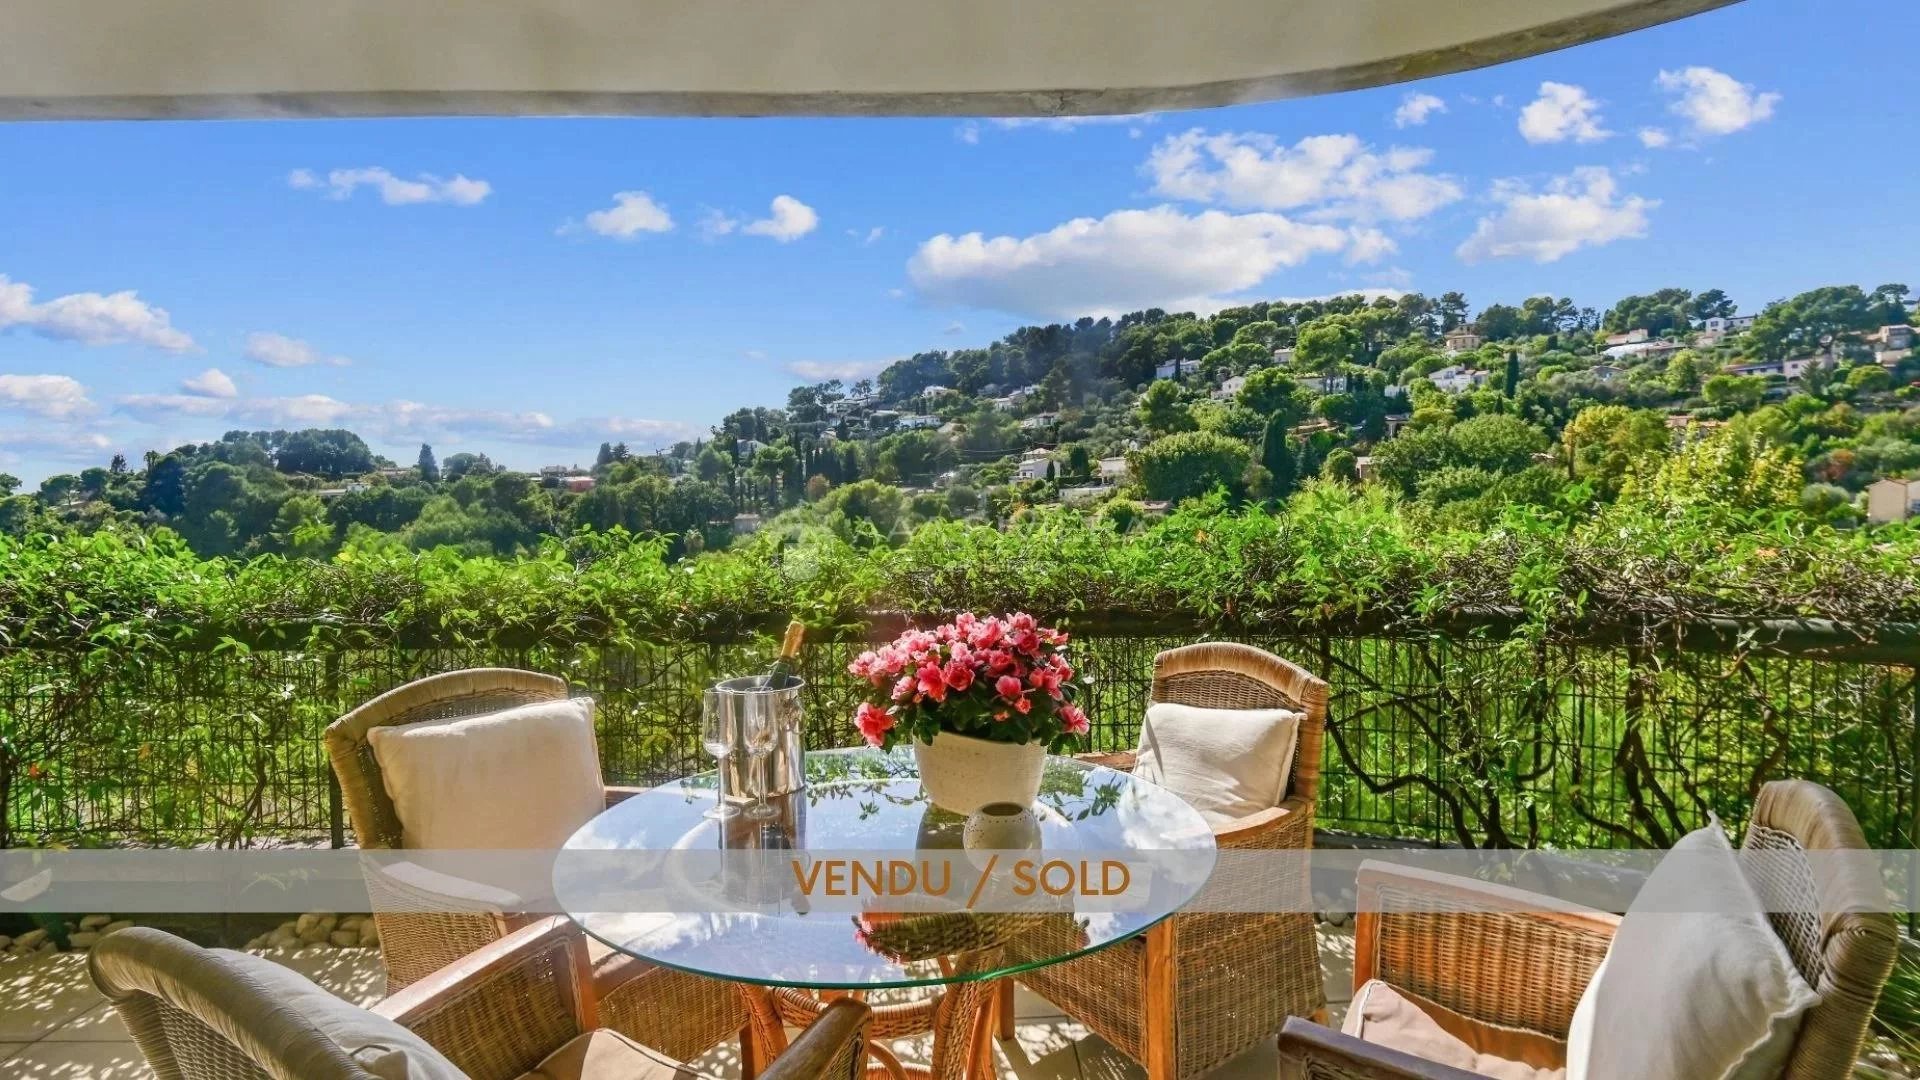 SOLD -  SOLE AGENT- Val de Mougins, 2-bedroom apt with large terrace, views and shops at your doorstep set in green surroundings